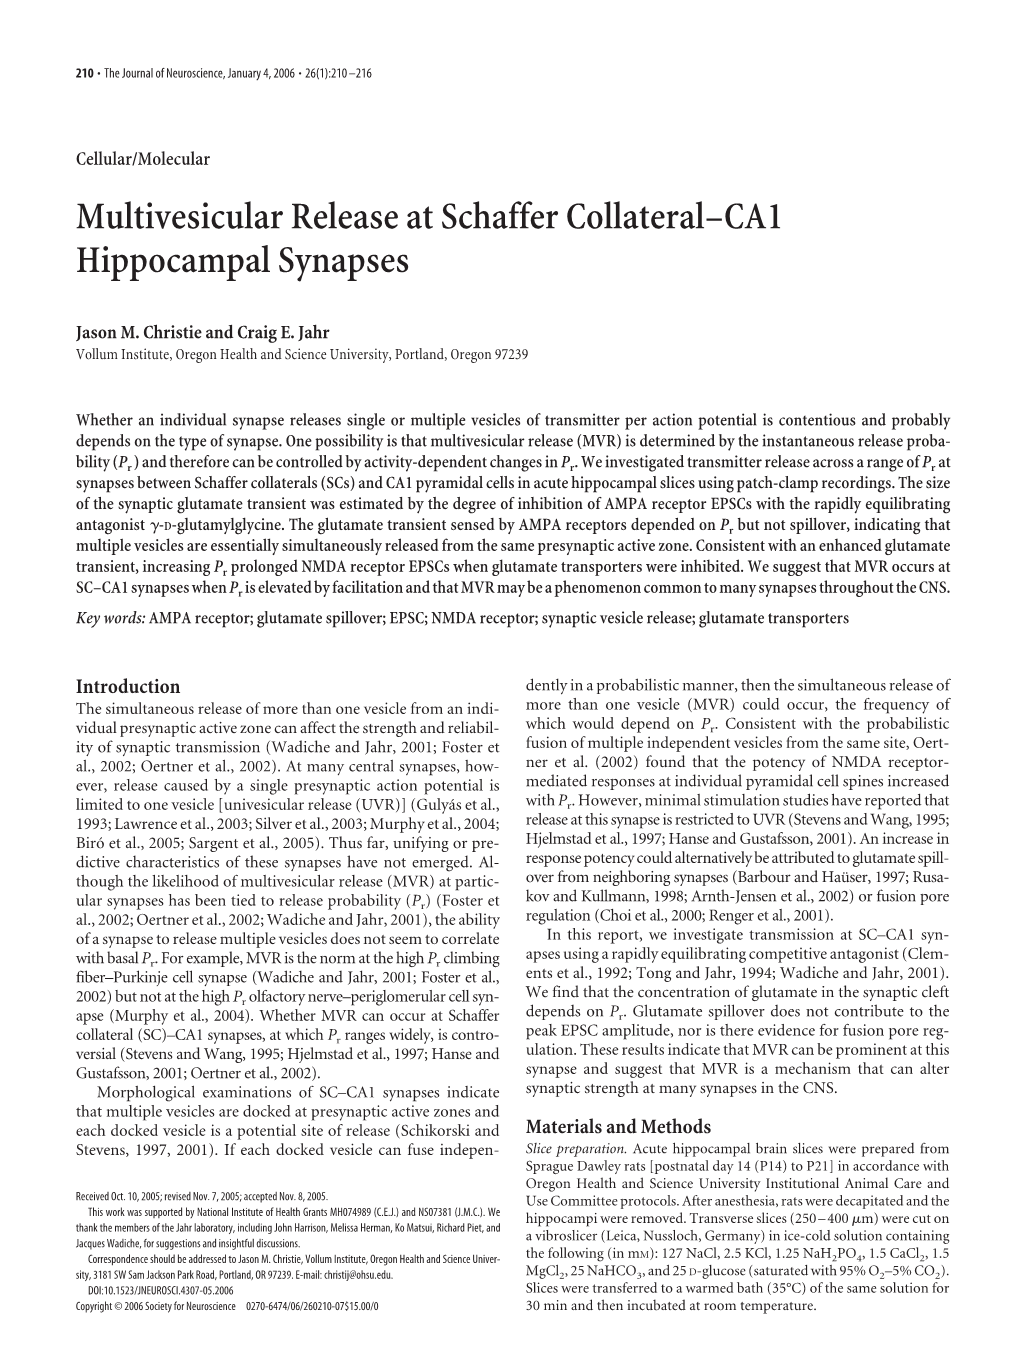 Multivesicular Release at Schaffer Collateral–CA1 Hippocampal Synapses